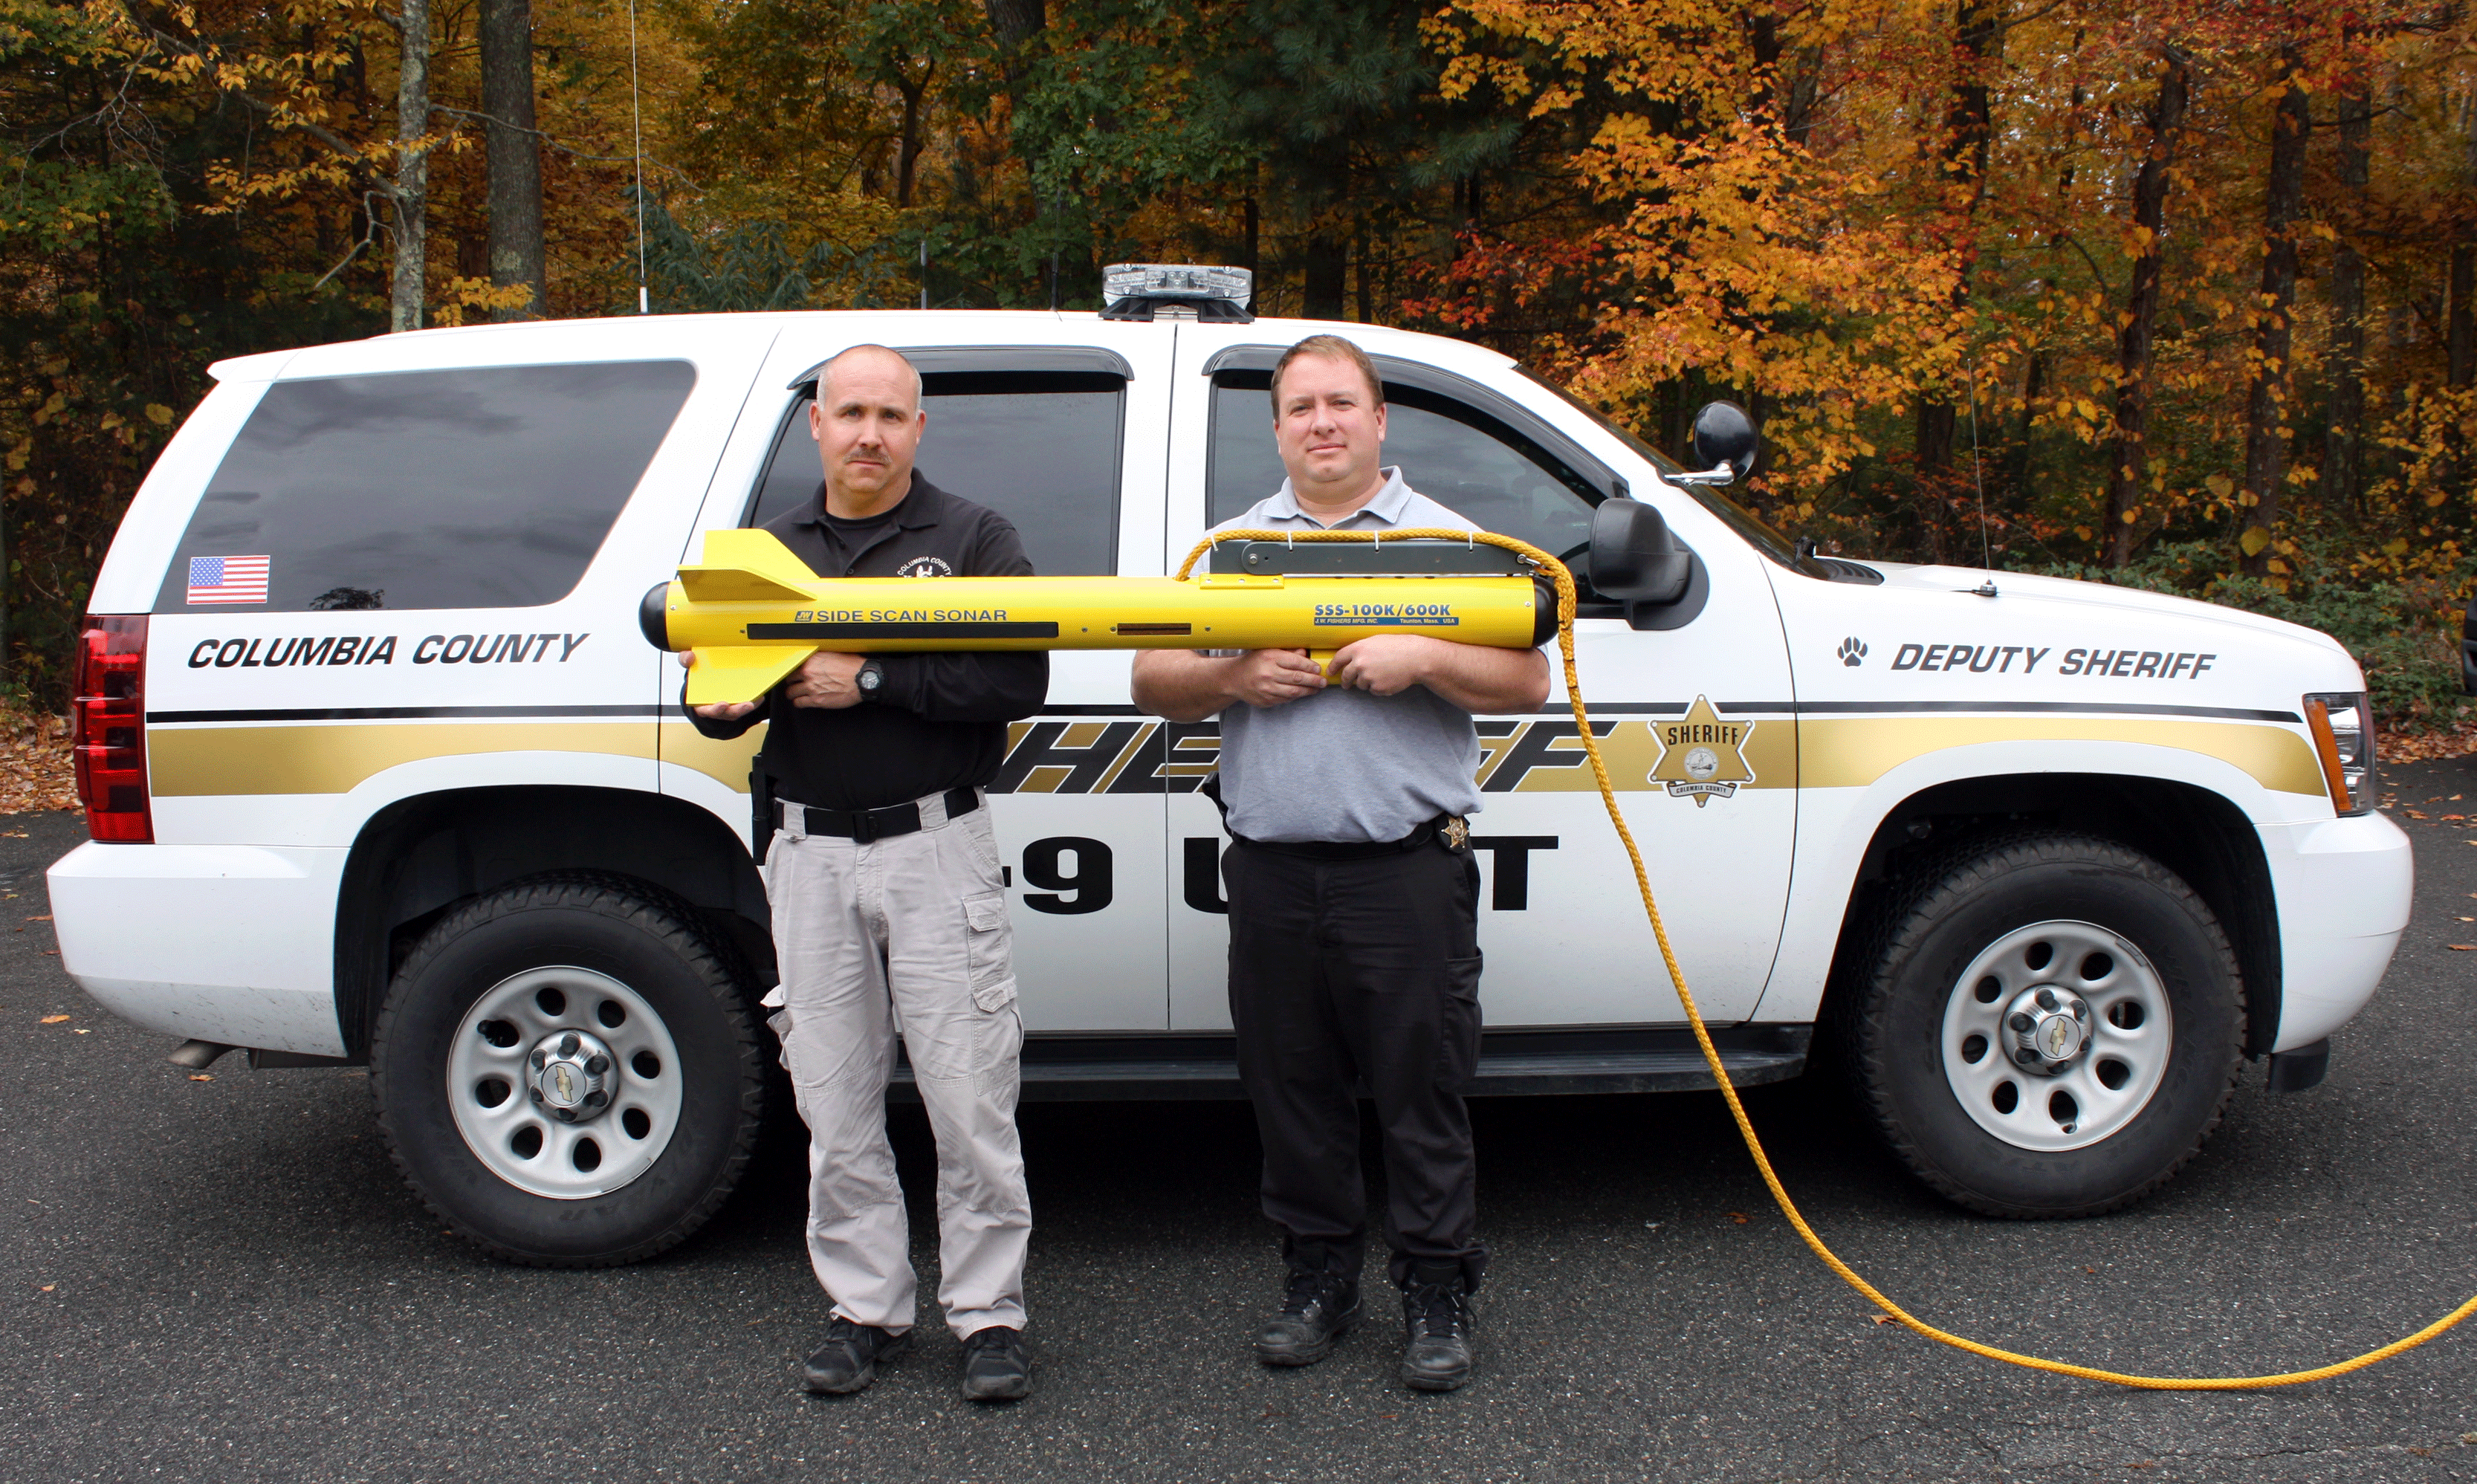 Columbia County Sheriff with Side Scan Sonar